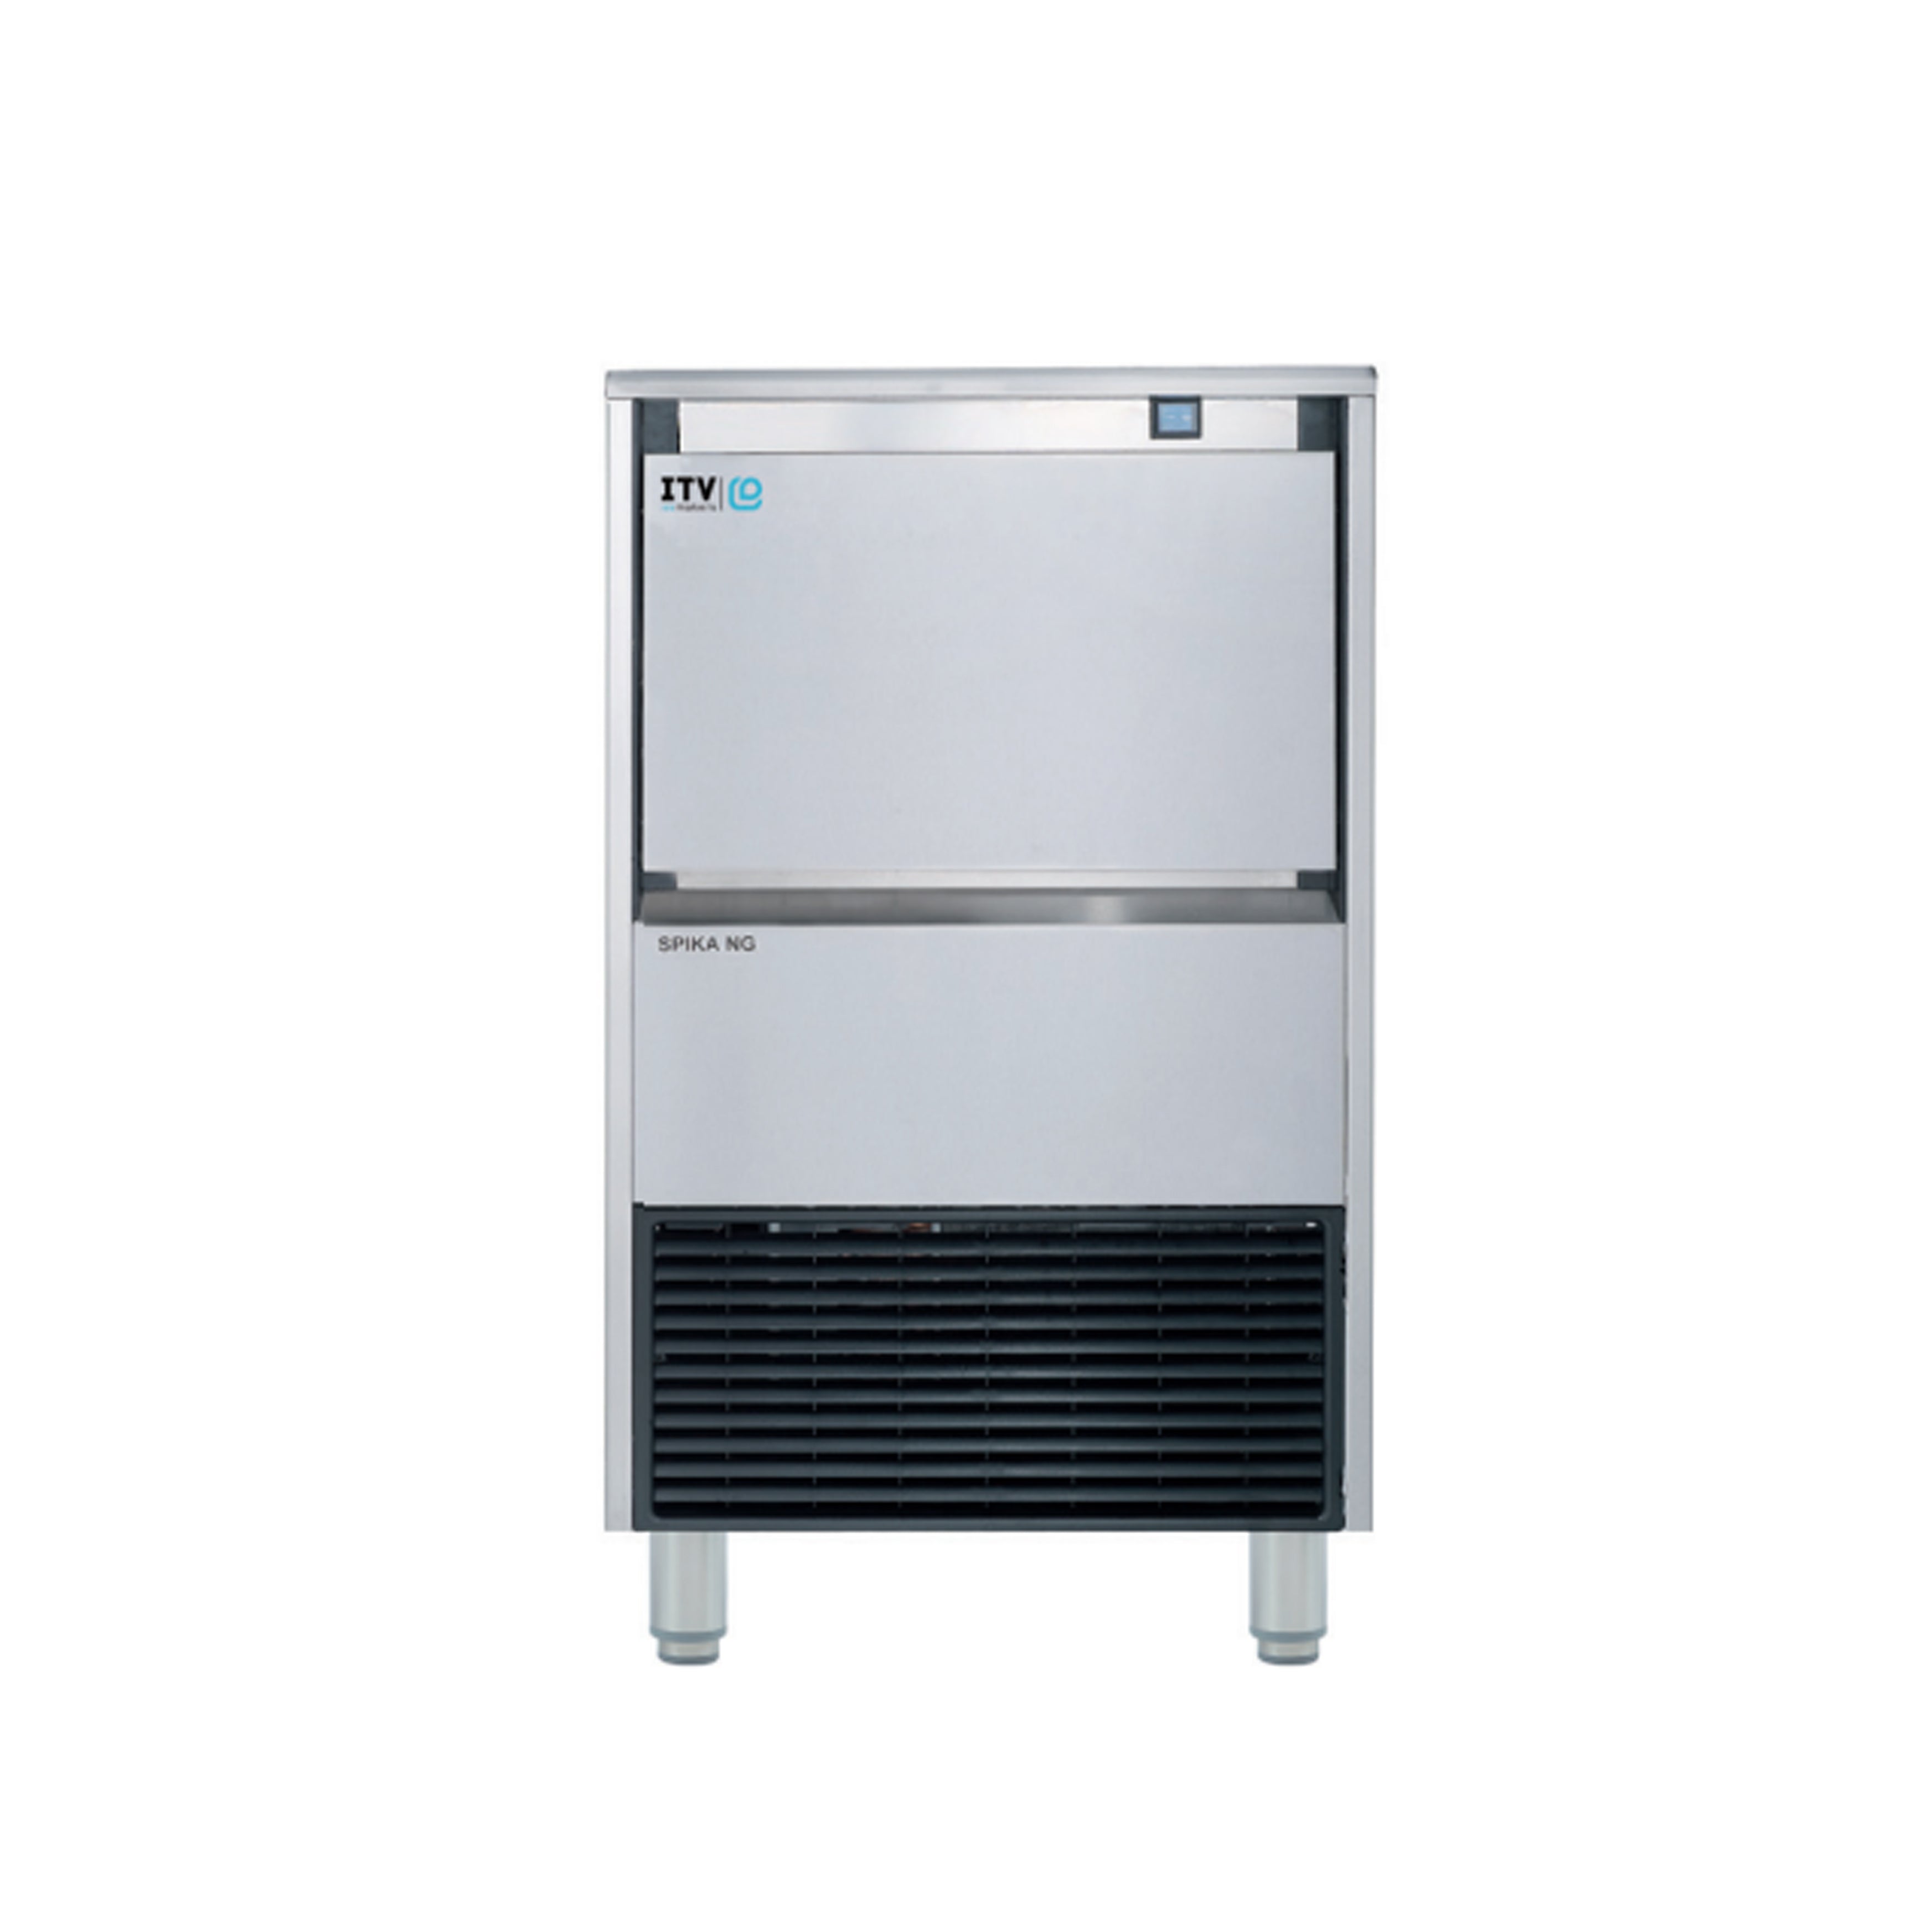 ITV - SPIKA NG 160A, Commercial Spika Cubers under-counter Ice Maker Self-Contained Ice Cube Machine 152lbs